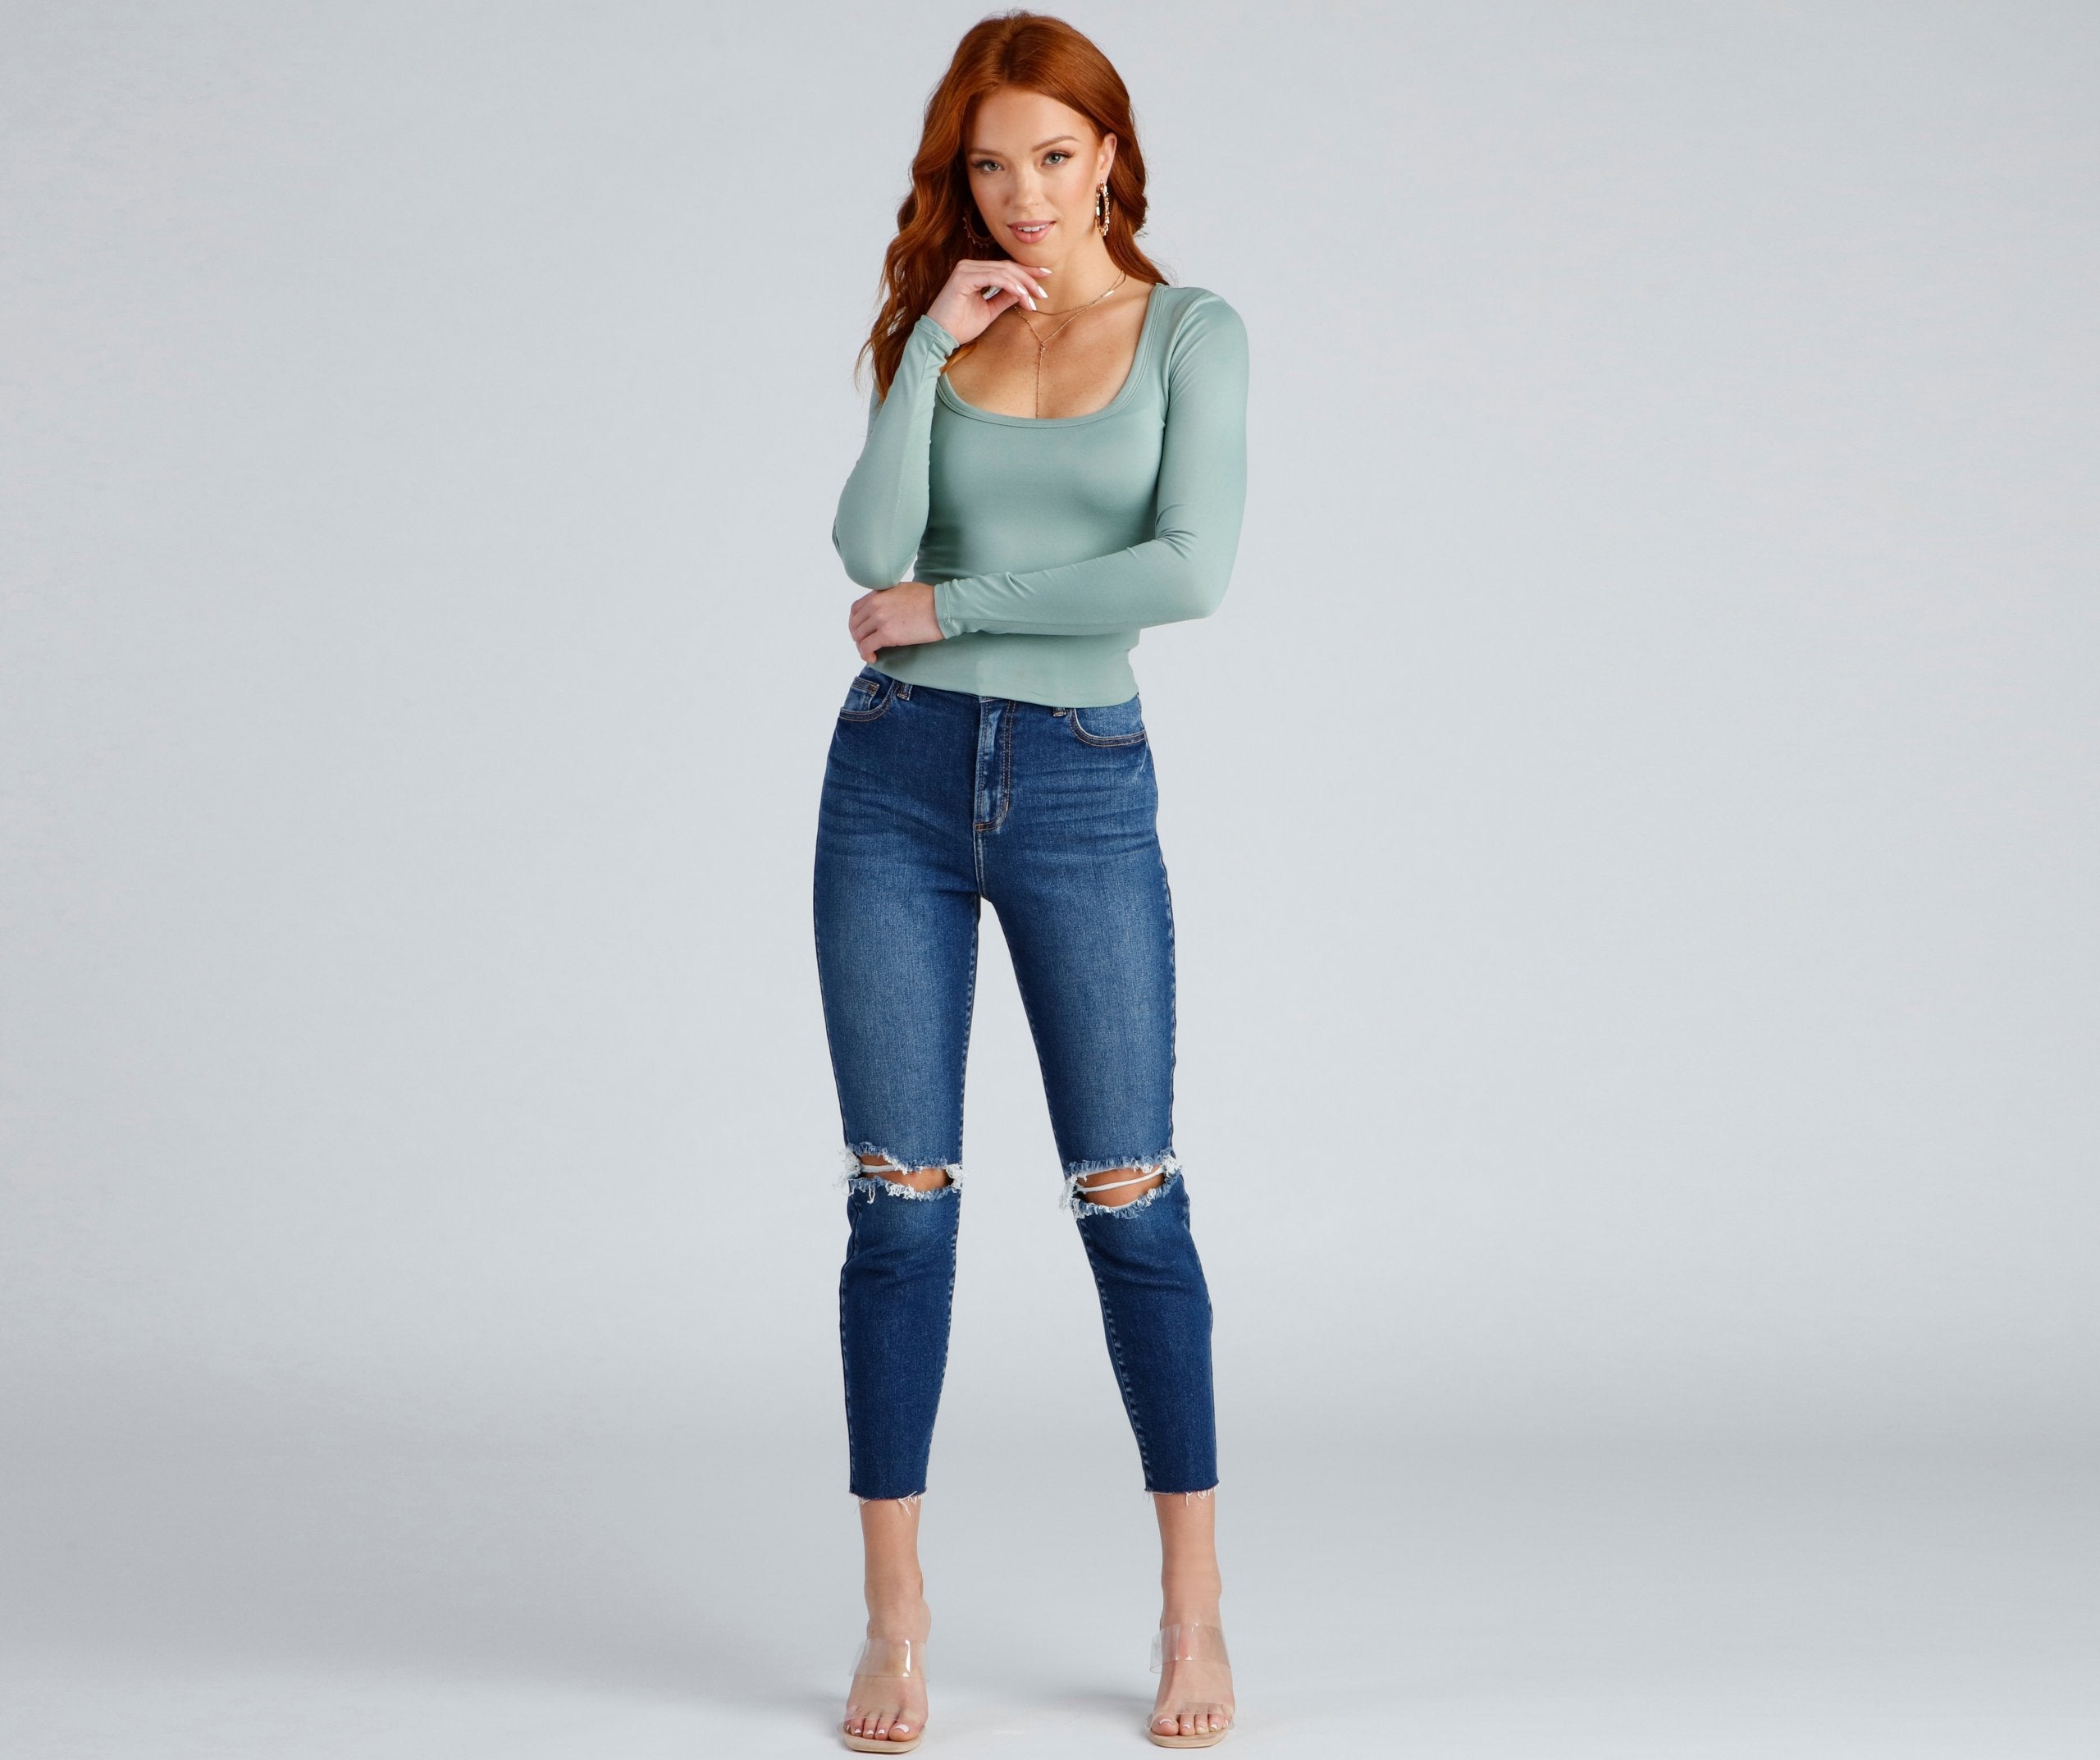 Basic Must-Have Long Sleeve Top - Lady Occasions